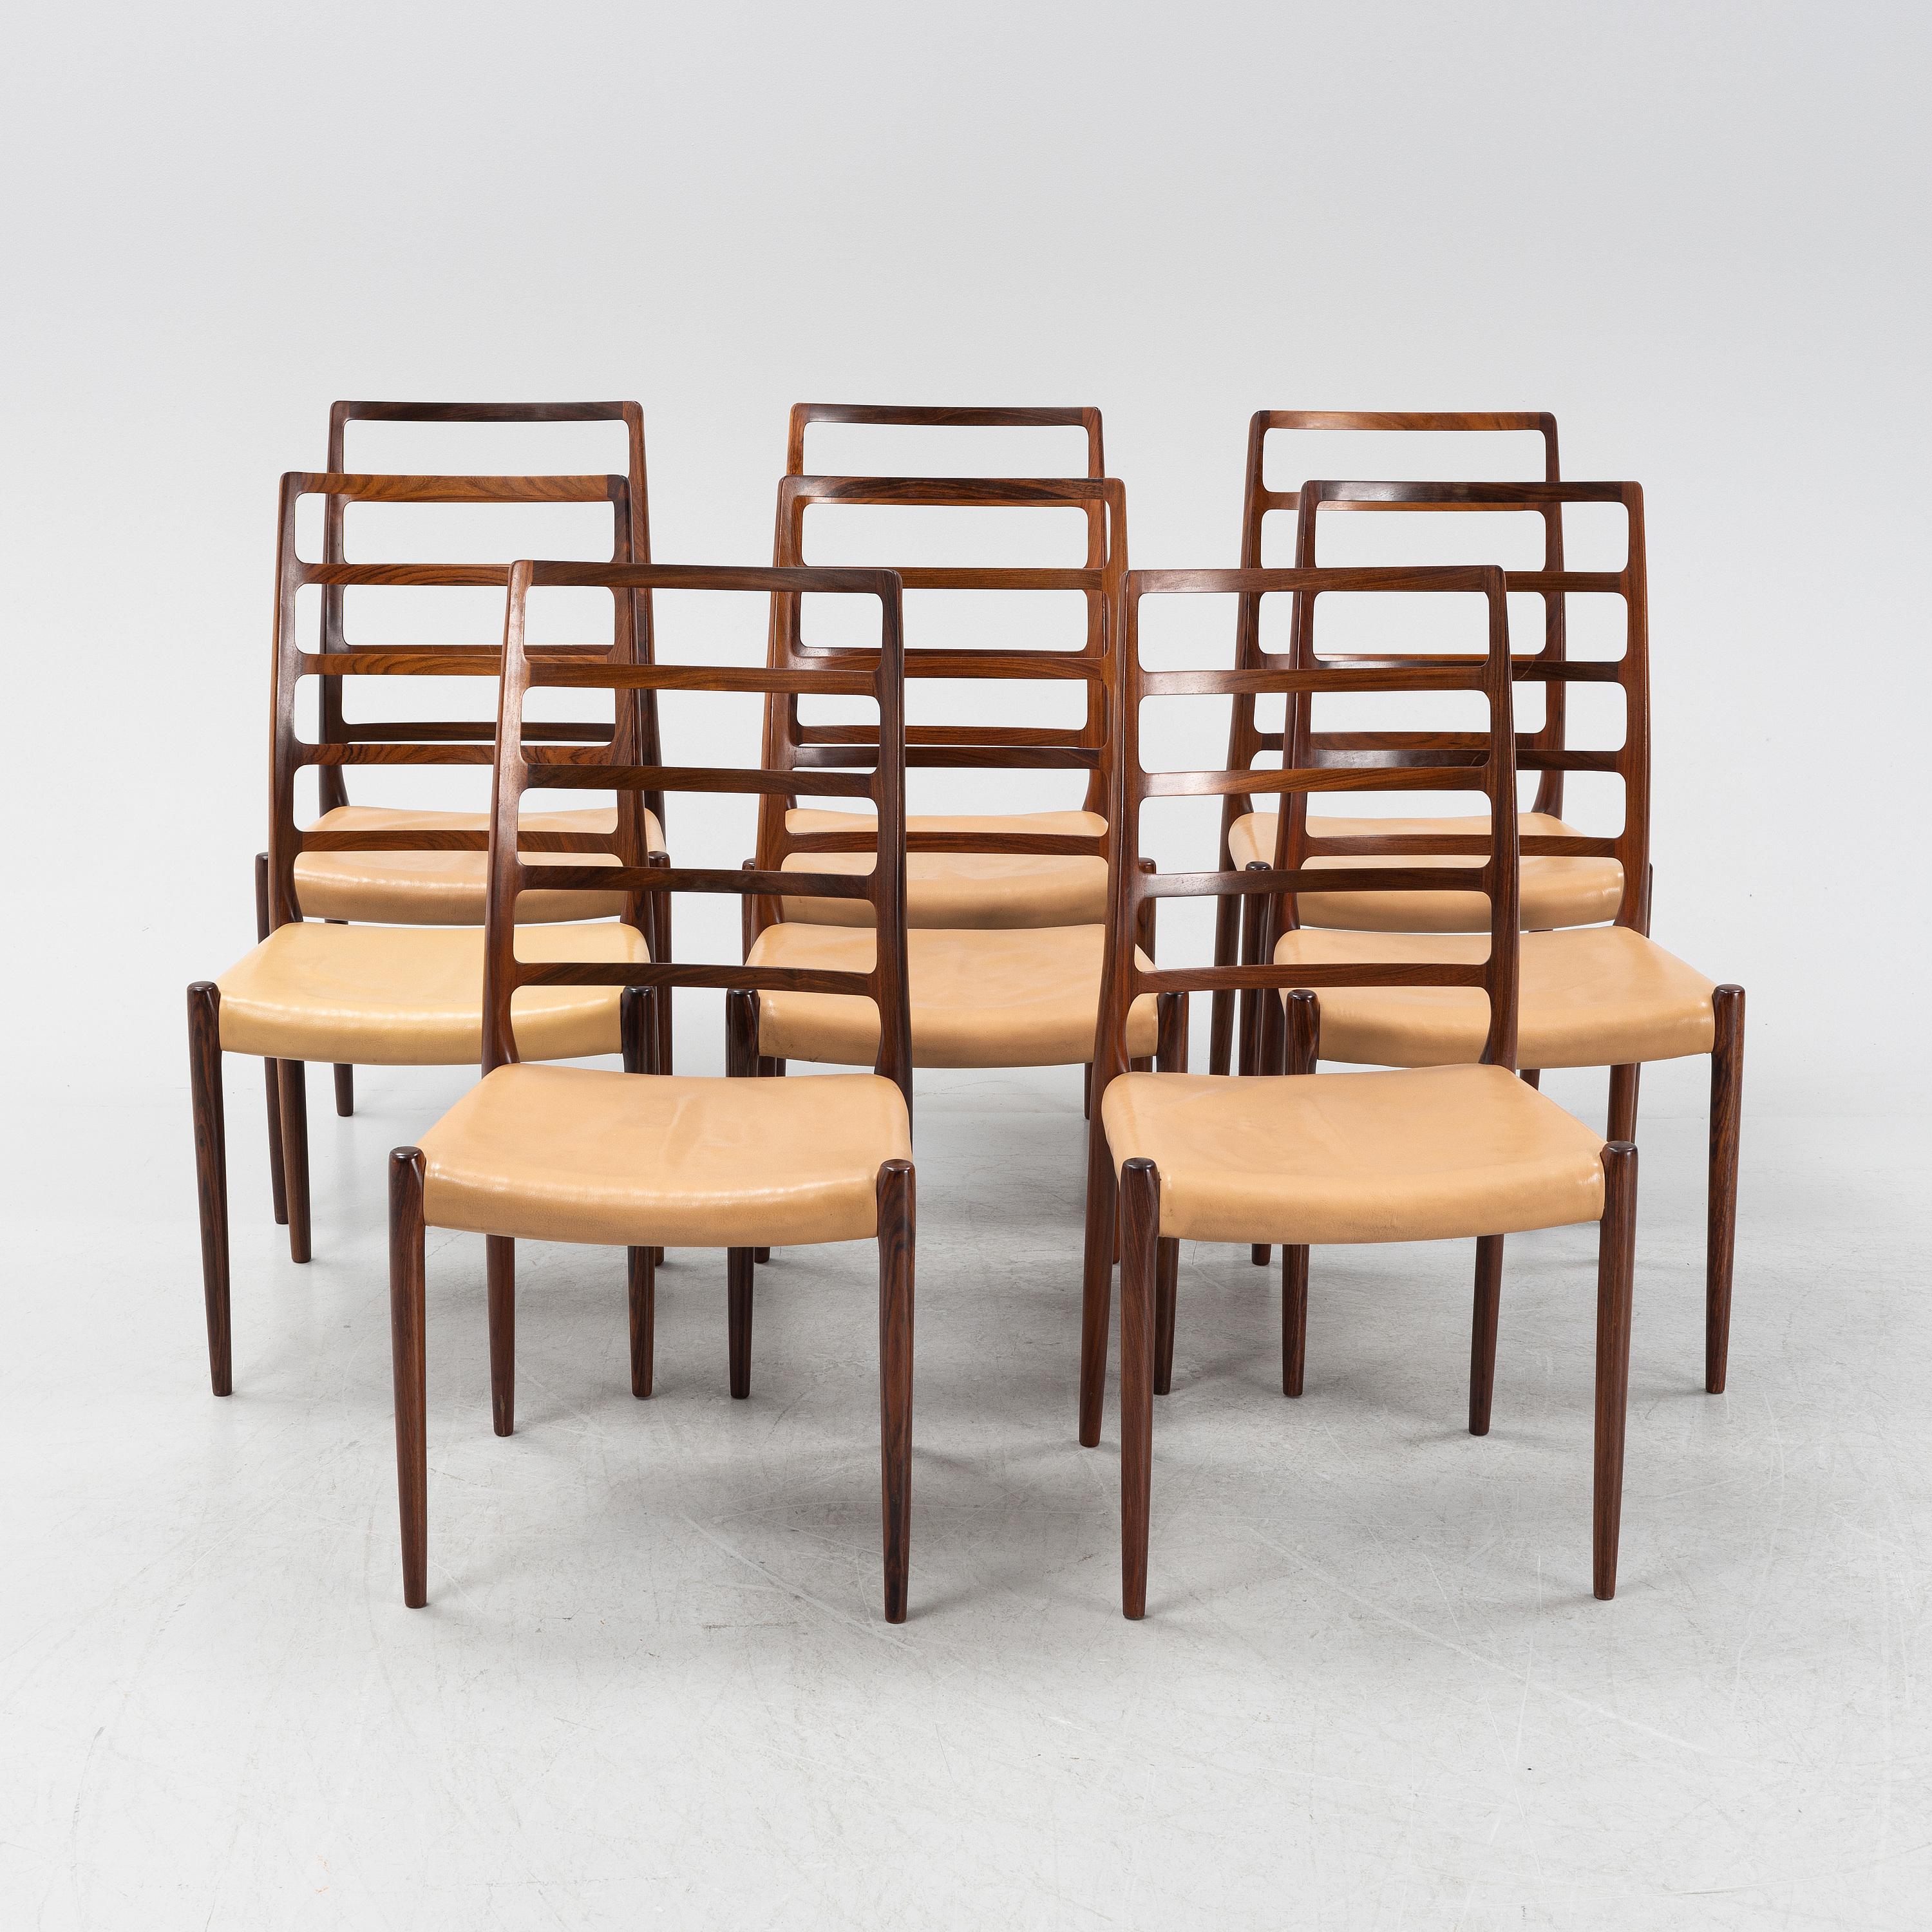 20th Century Neils Otto Moller Dining Chairs Mod 82, Set of 8 in Rosewood Denmark 1960 For Sale